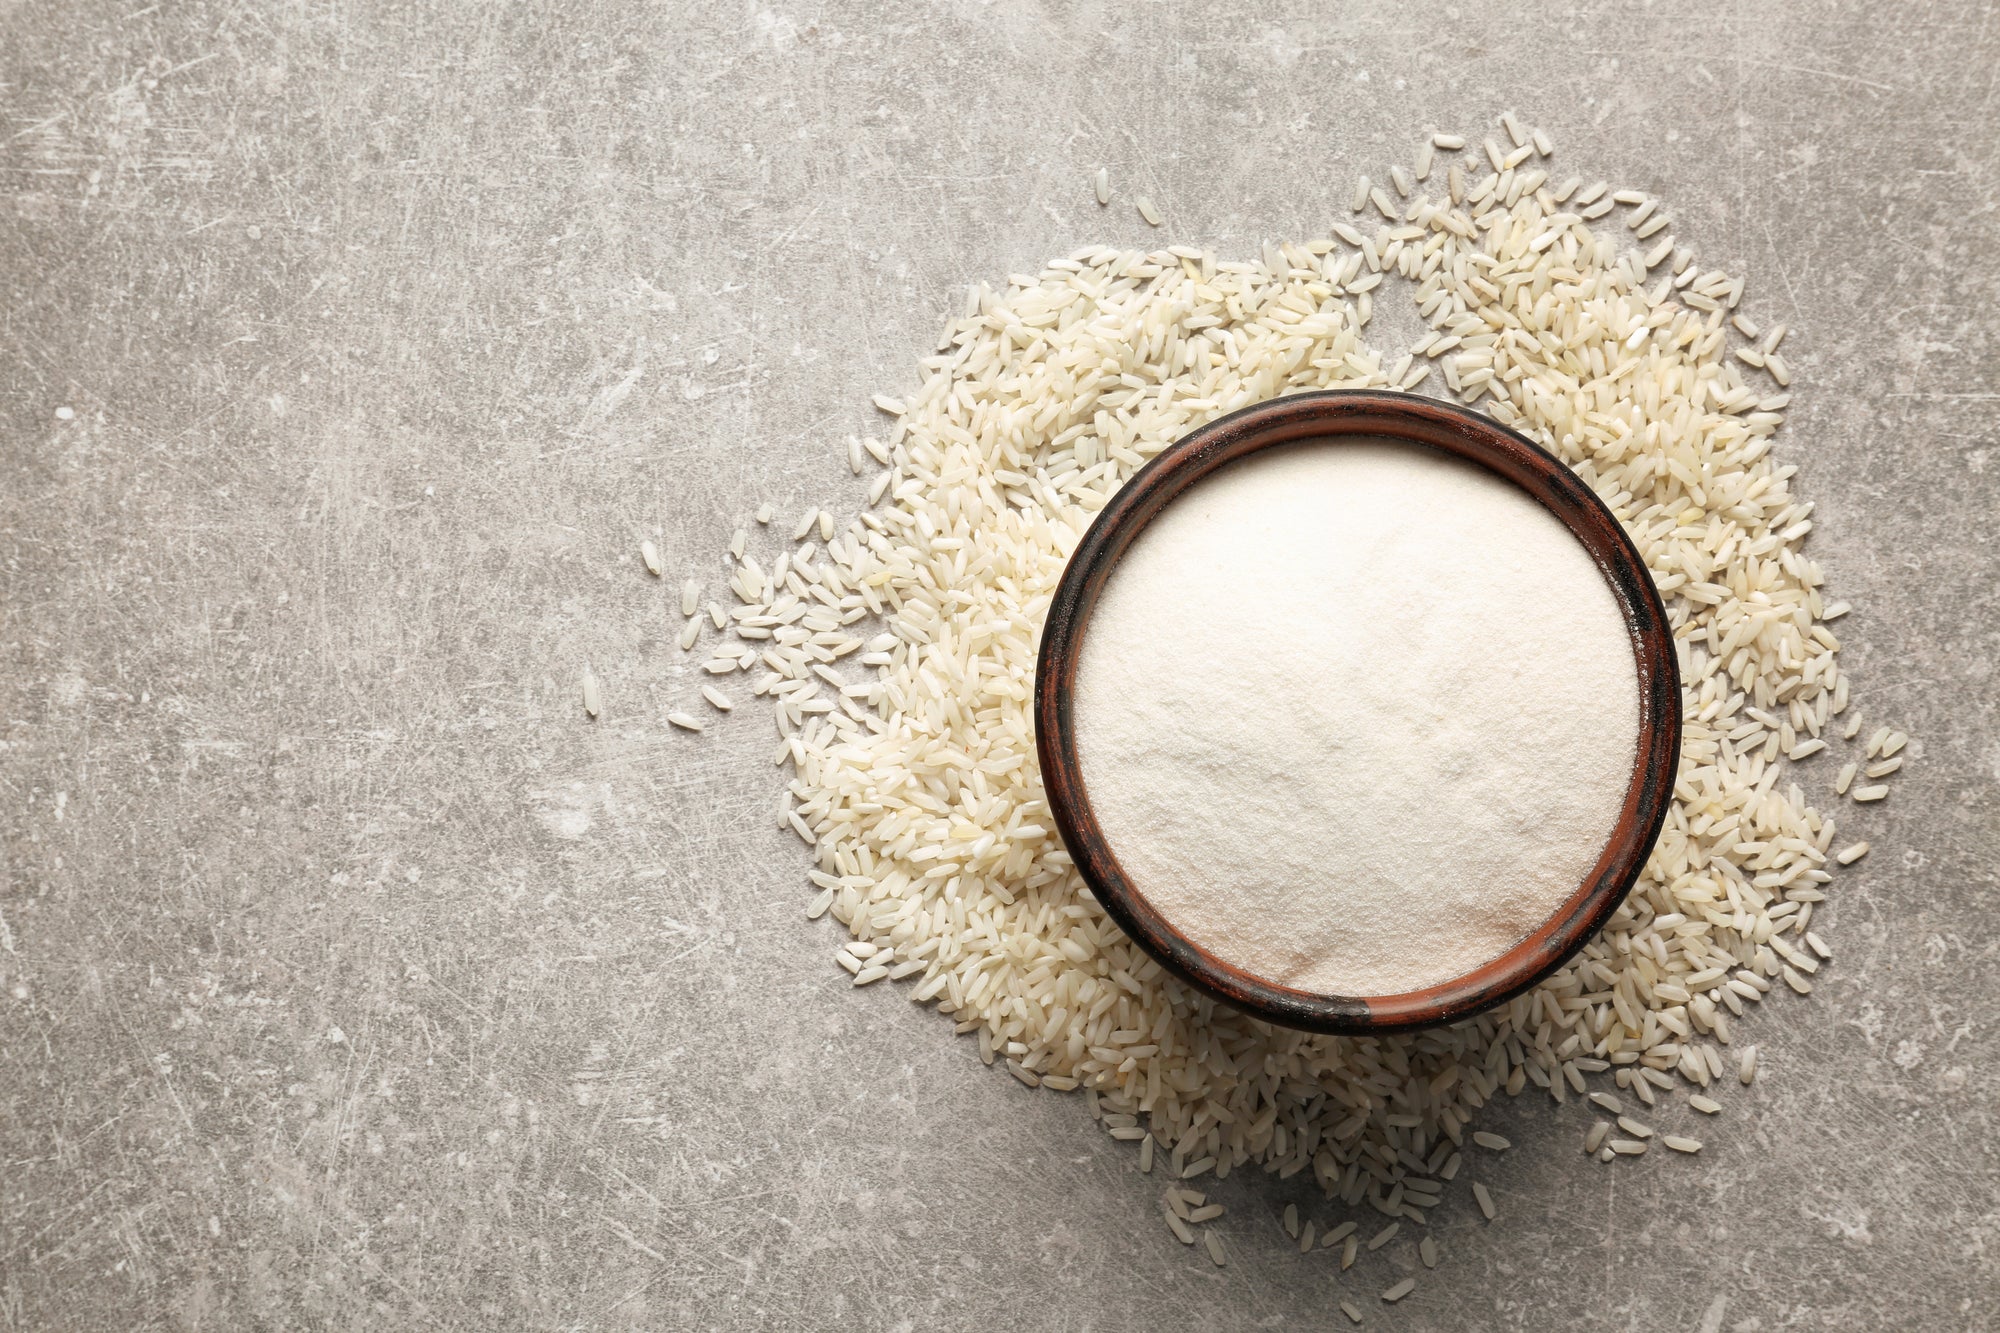 Rice Protein Powder: What You Must Know Before Trying It